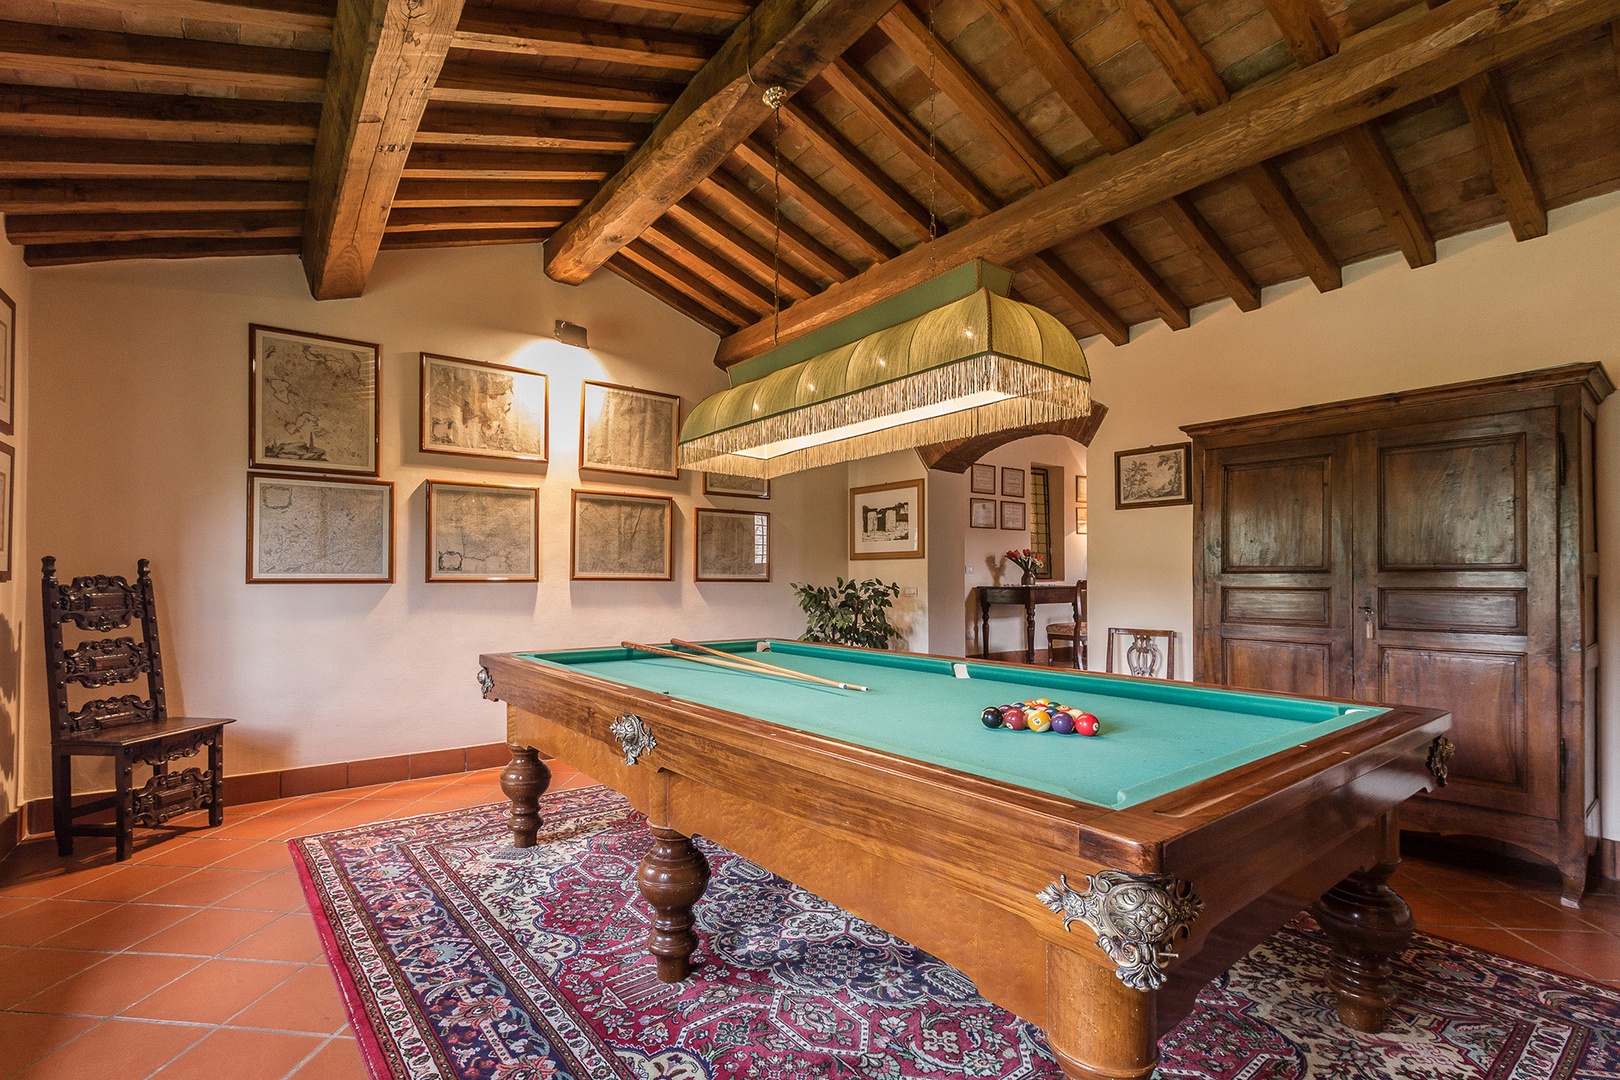 Enjoy a game of billiards! The bookcase has a small library that includes some books in English.